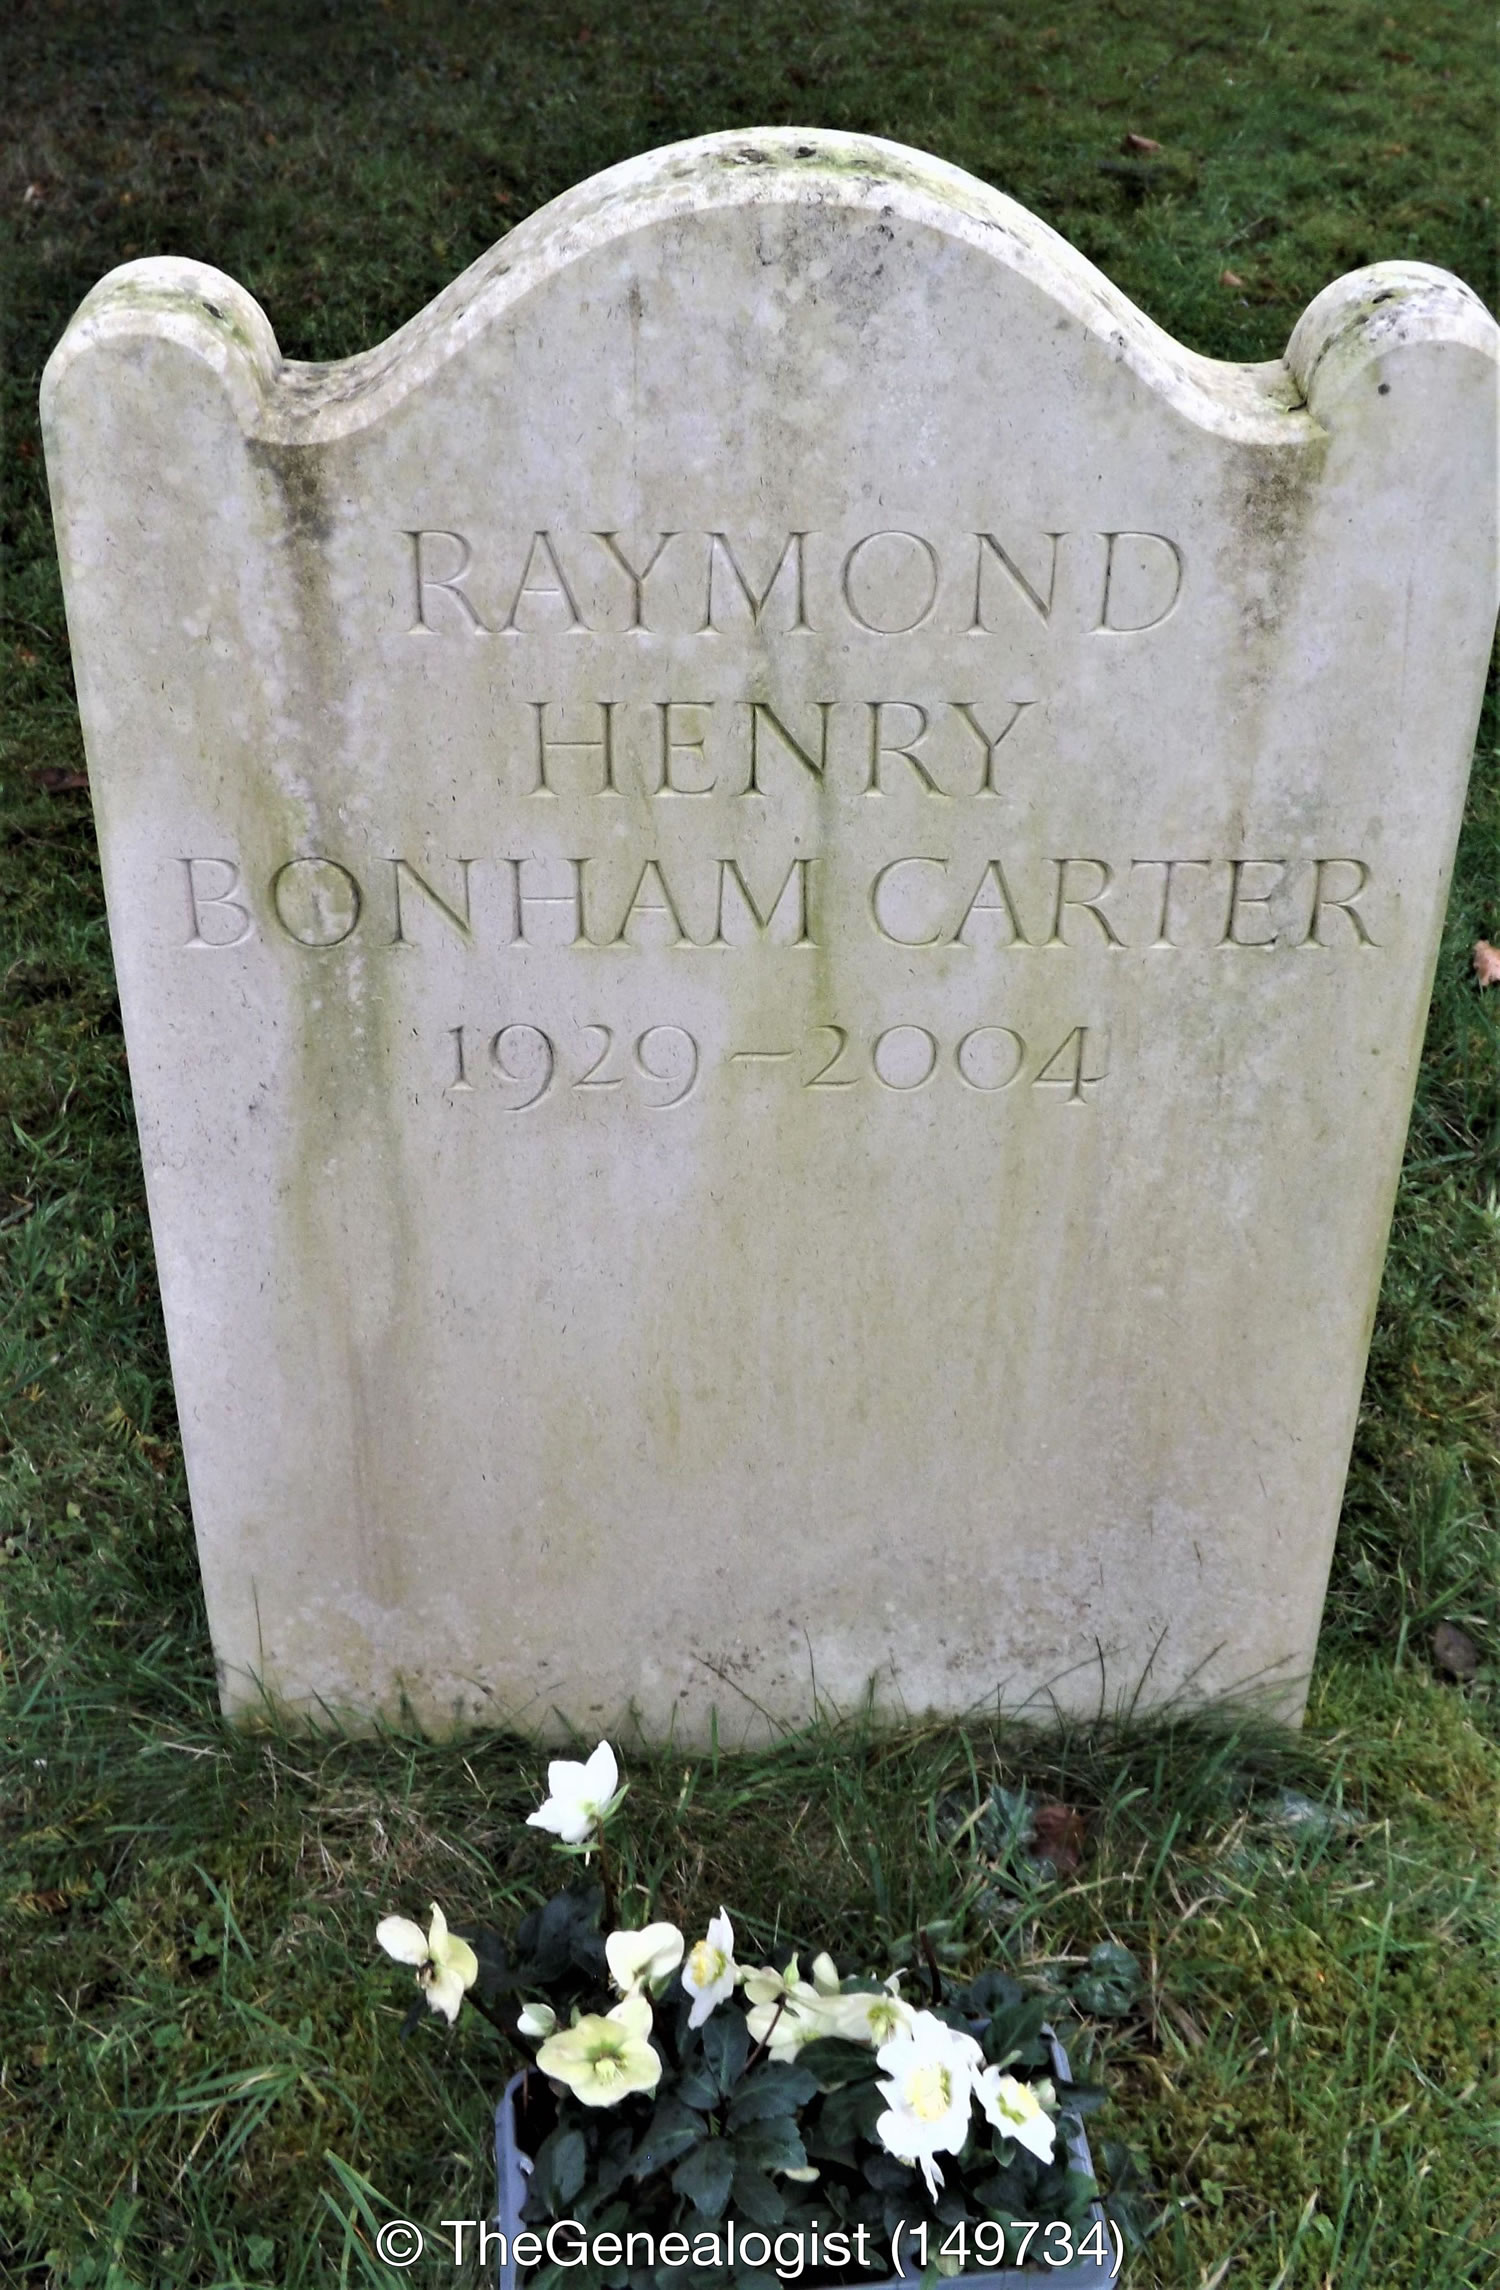 The headstone for Raymond Bonham Carter, the father of Helena, is one of those included in TheGenealogist's International Headstone Collection